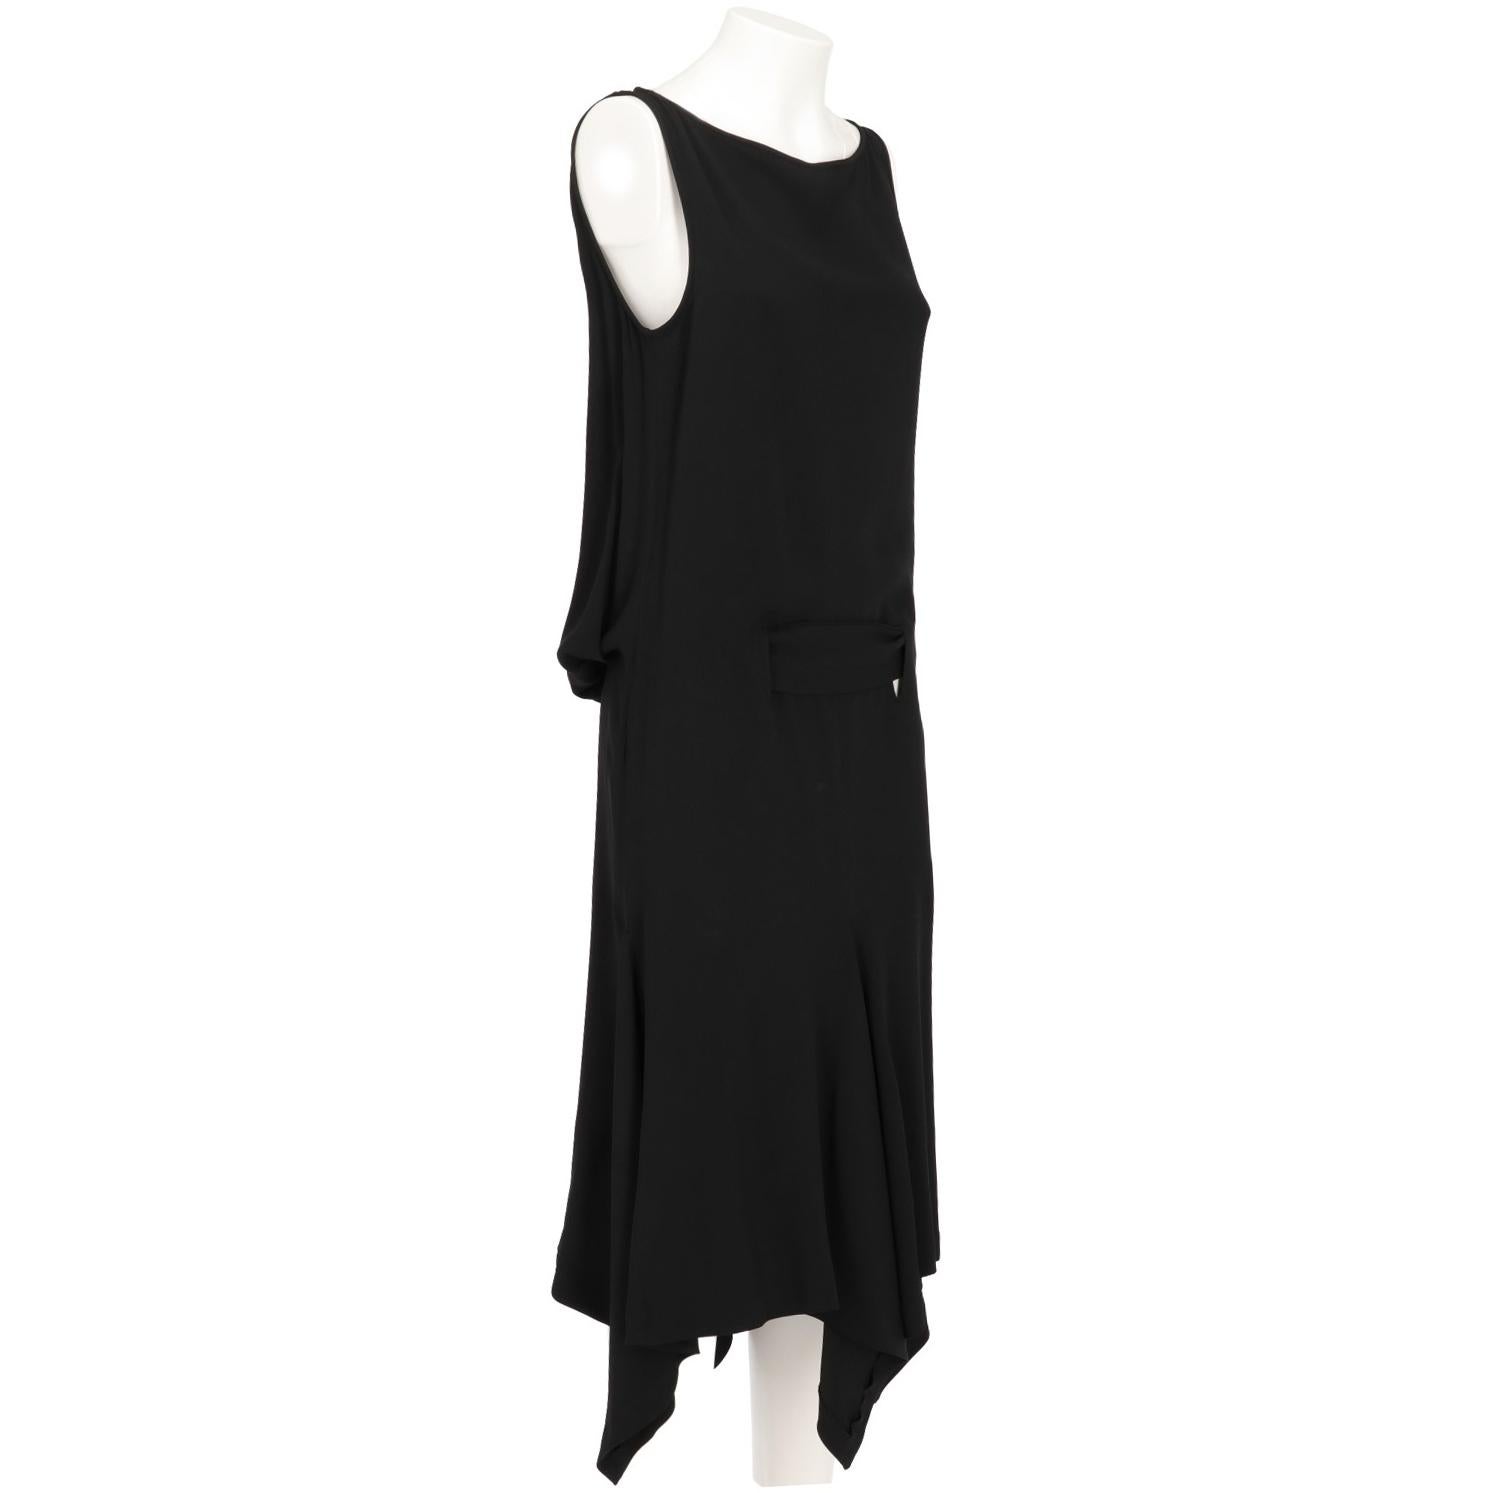 Black sleeveless dress by Alexander Mcqueen, with round collar with hook back fastening, deep neckline on the back, wide pointed skirt and decorative waist belt with hidden press studs.

Years: 90s

Made in Italy

Size: 44 IT

Linear